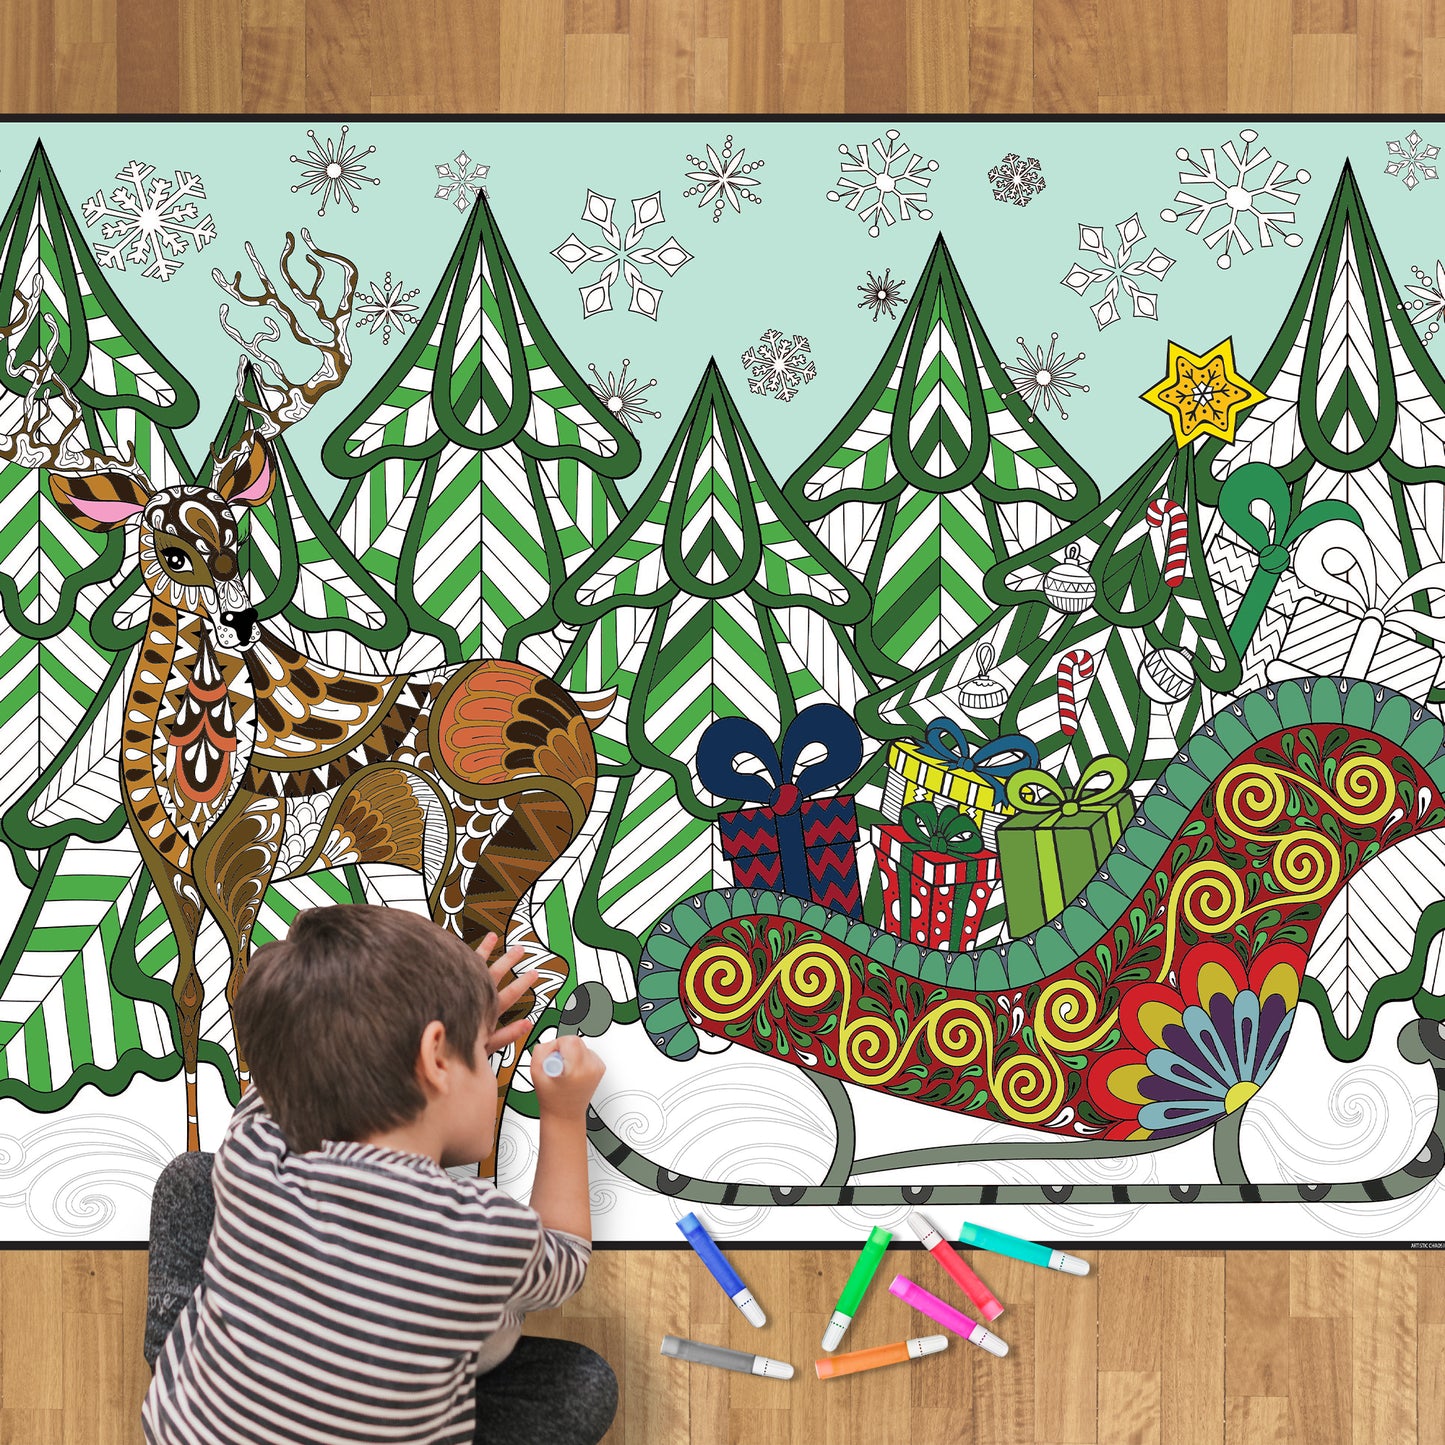 Premium Giant Sleigh Coloring Poster